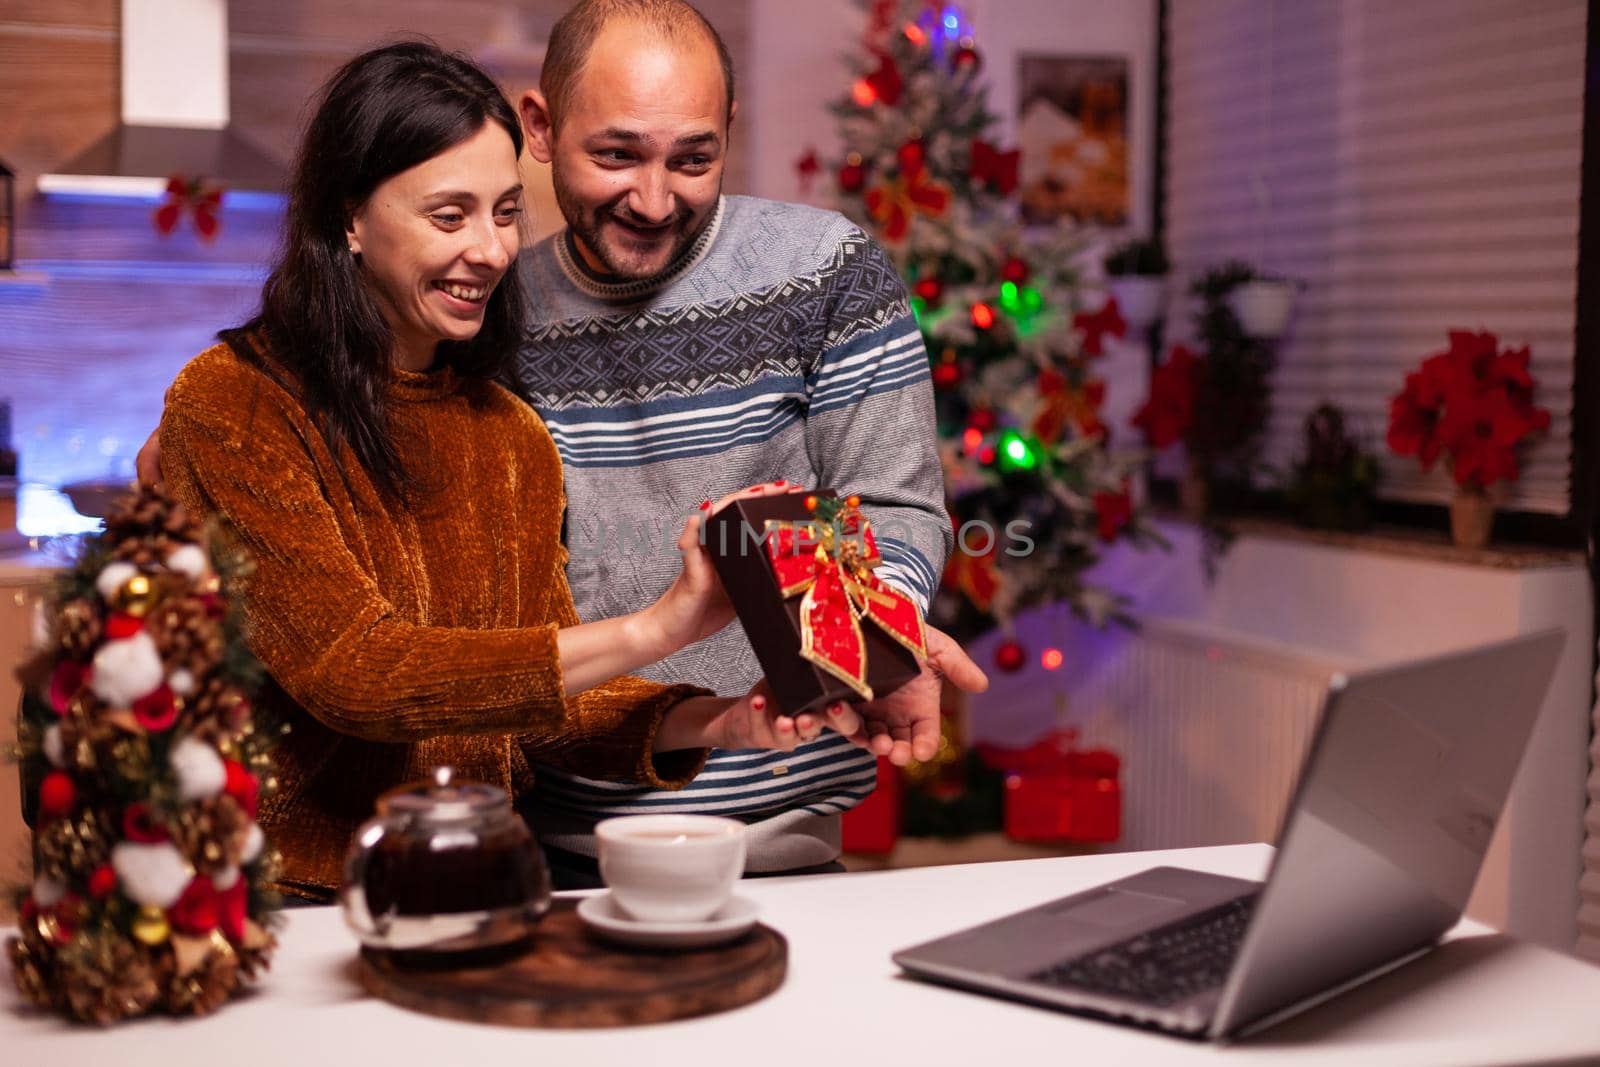 Happy family showing xmas present surprise to remote friends during online videocall meeting on laptop computer standing in festive decorated kitchen. Cheerful couple enjoying christmas holiday